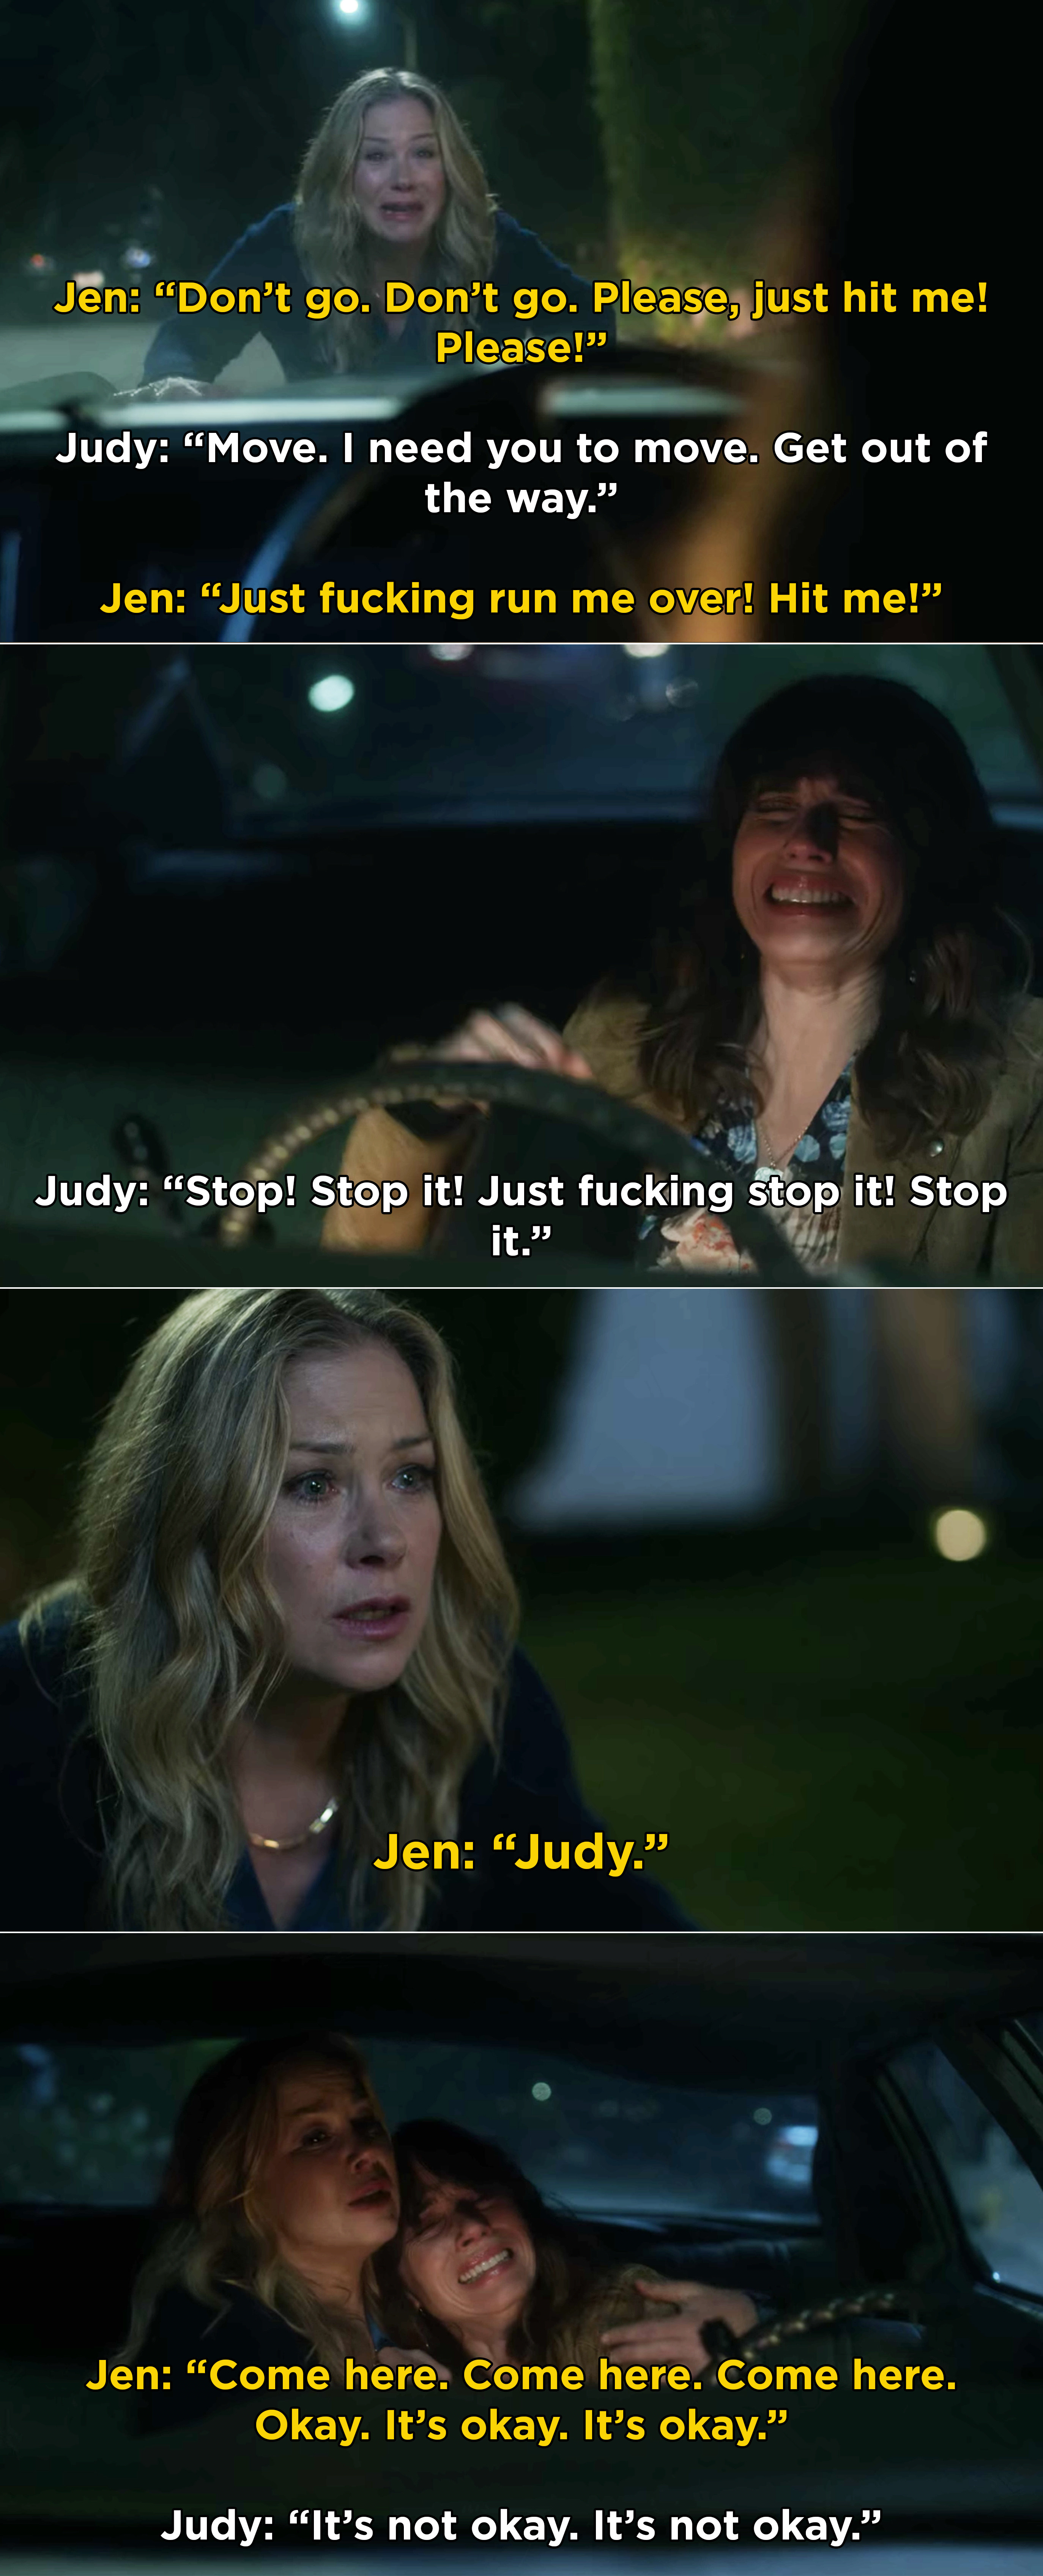 Jen consoling Judy inside her car after Judy asks her to stop yelling